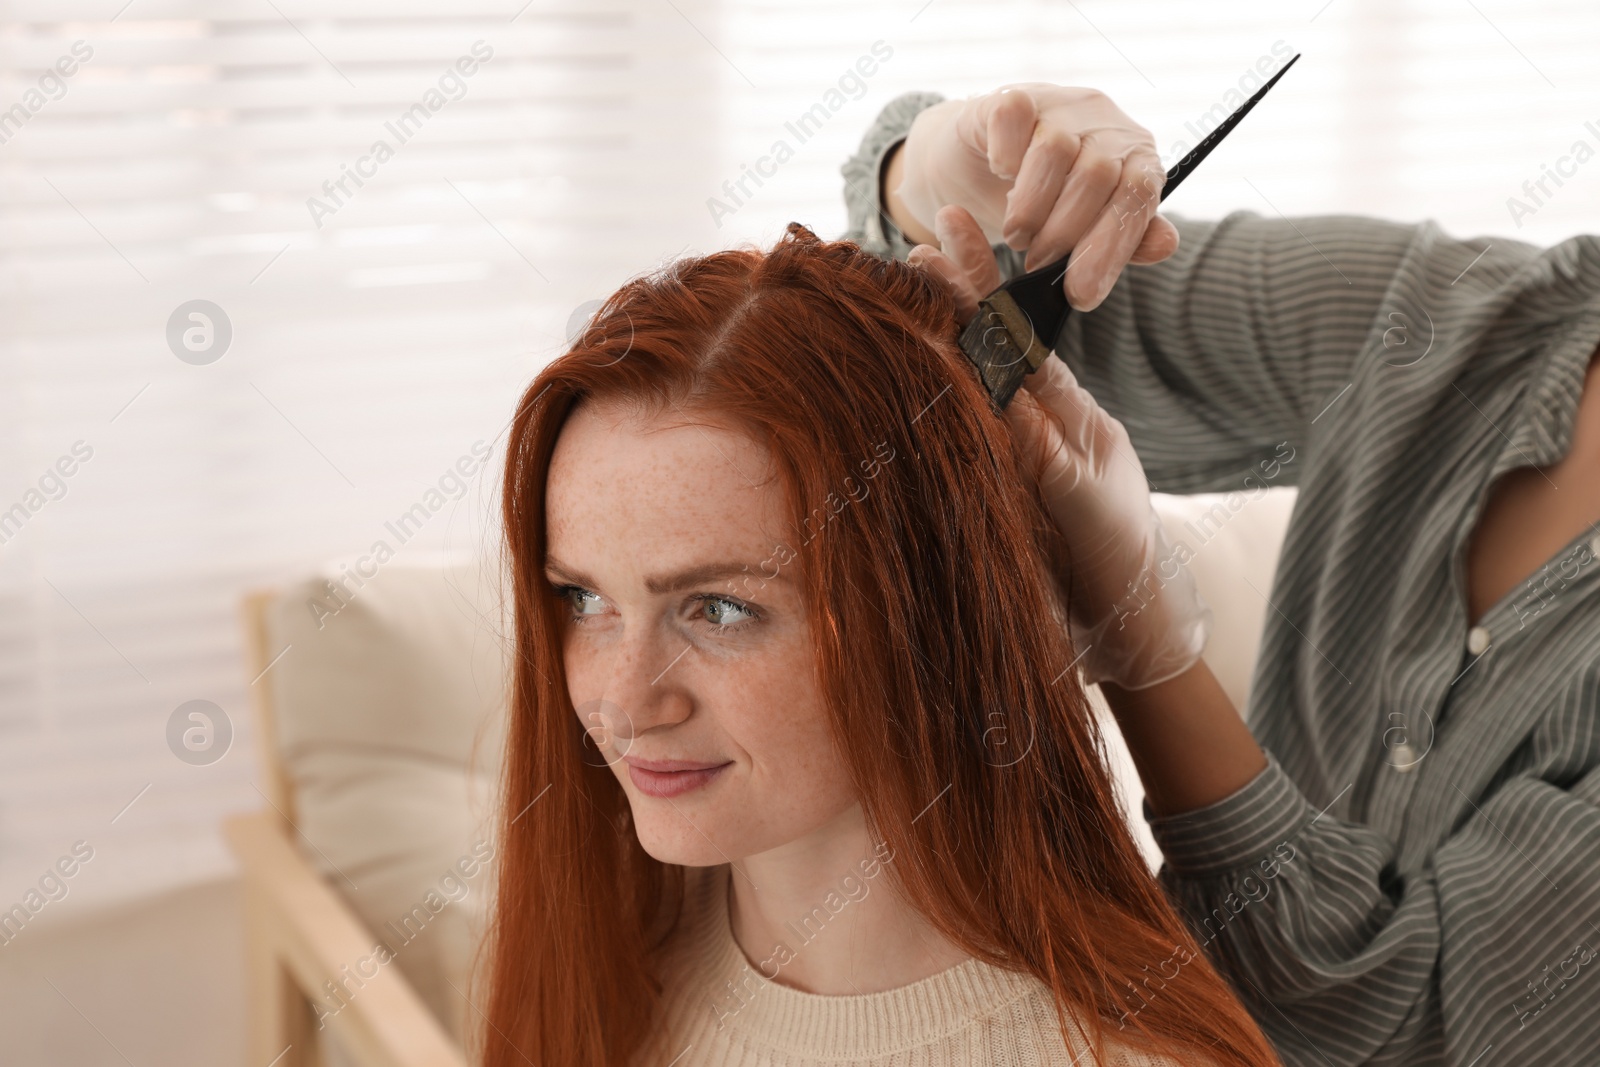 Photo of Professional hairdresser dyeing woman's hair with henna in beauty salon